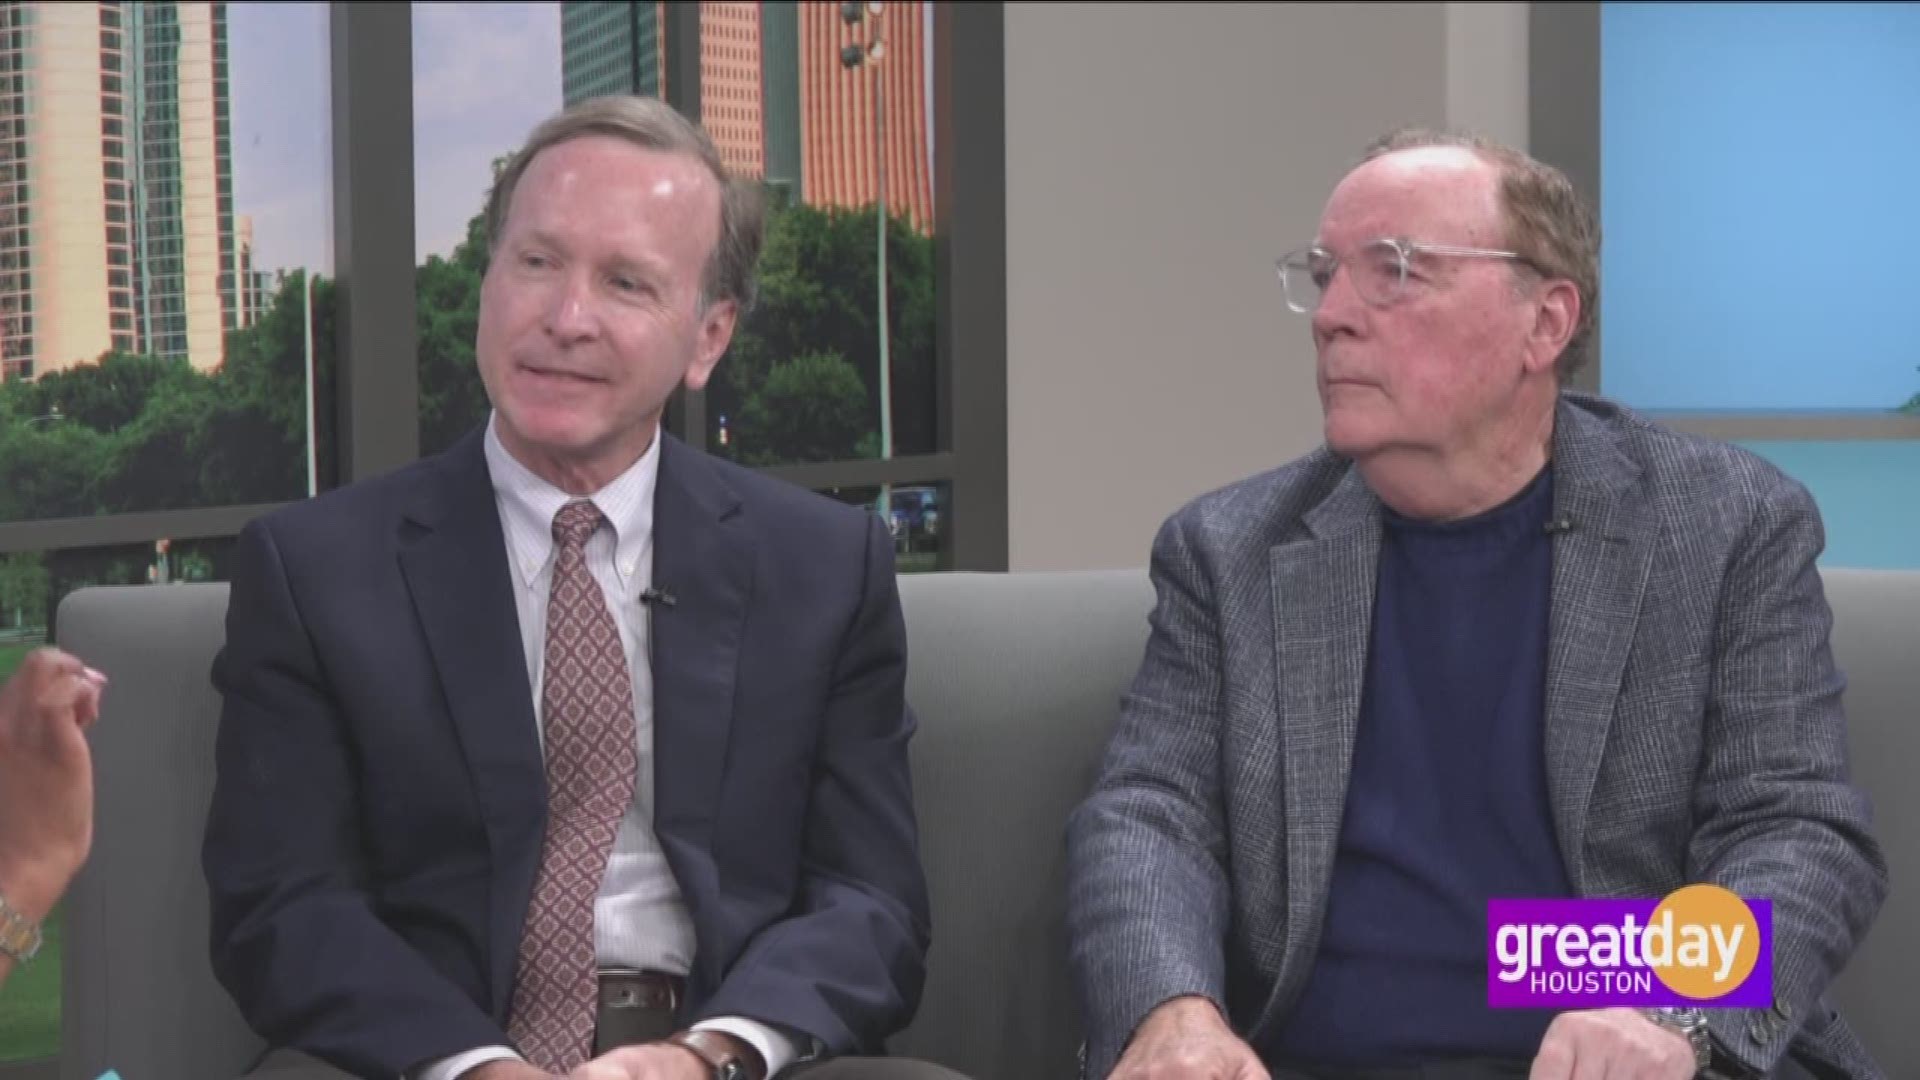 NYT best-selling author James Patterson and Neil Bush discuss the power of literacy